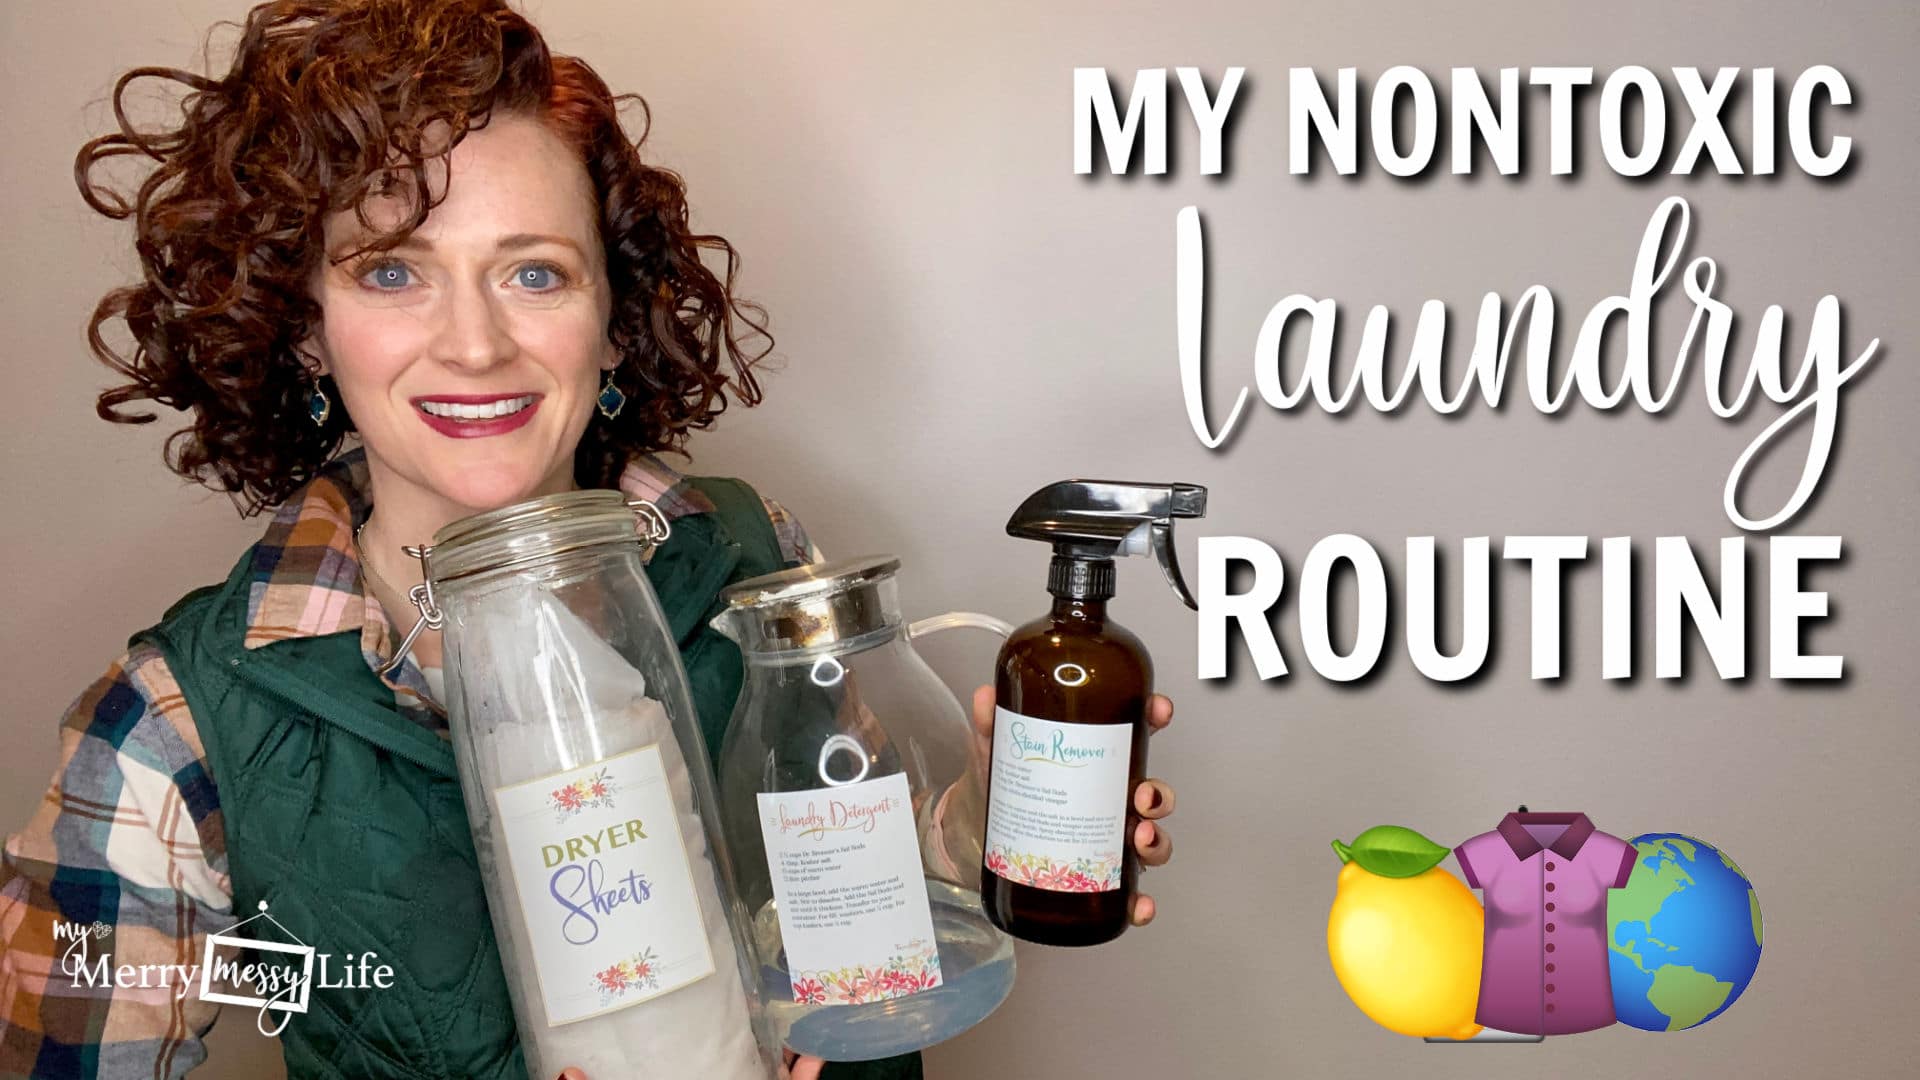 My Nontoxic Laundry Routine as a Mom of Four